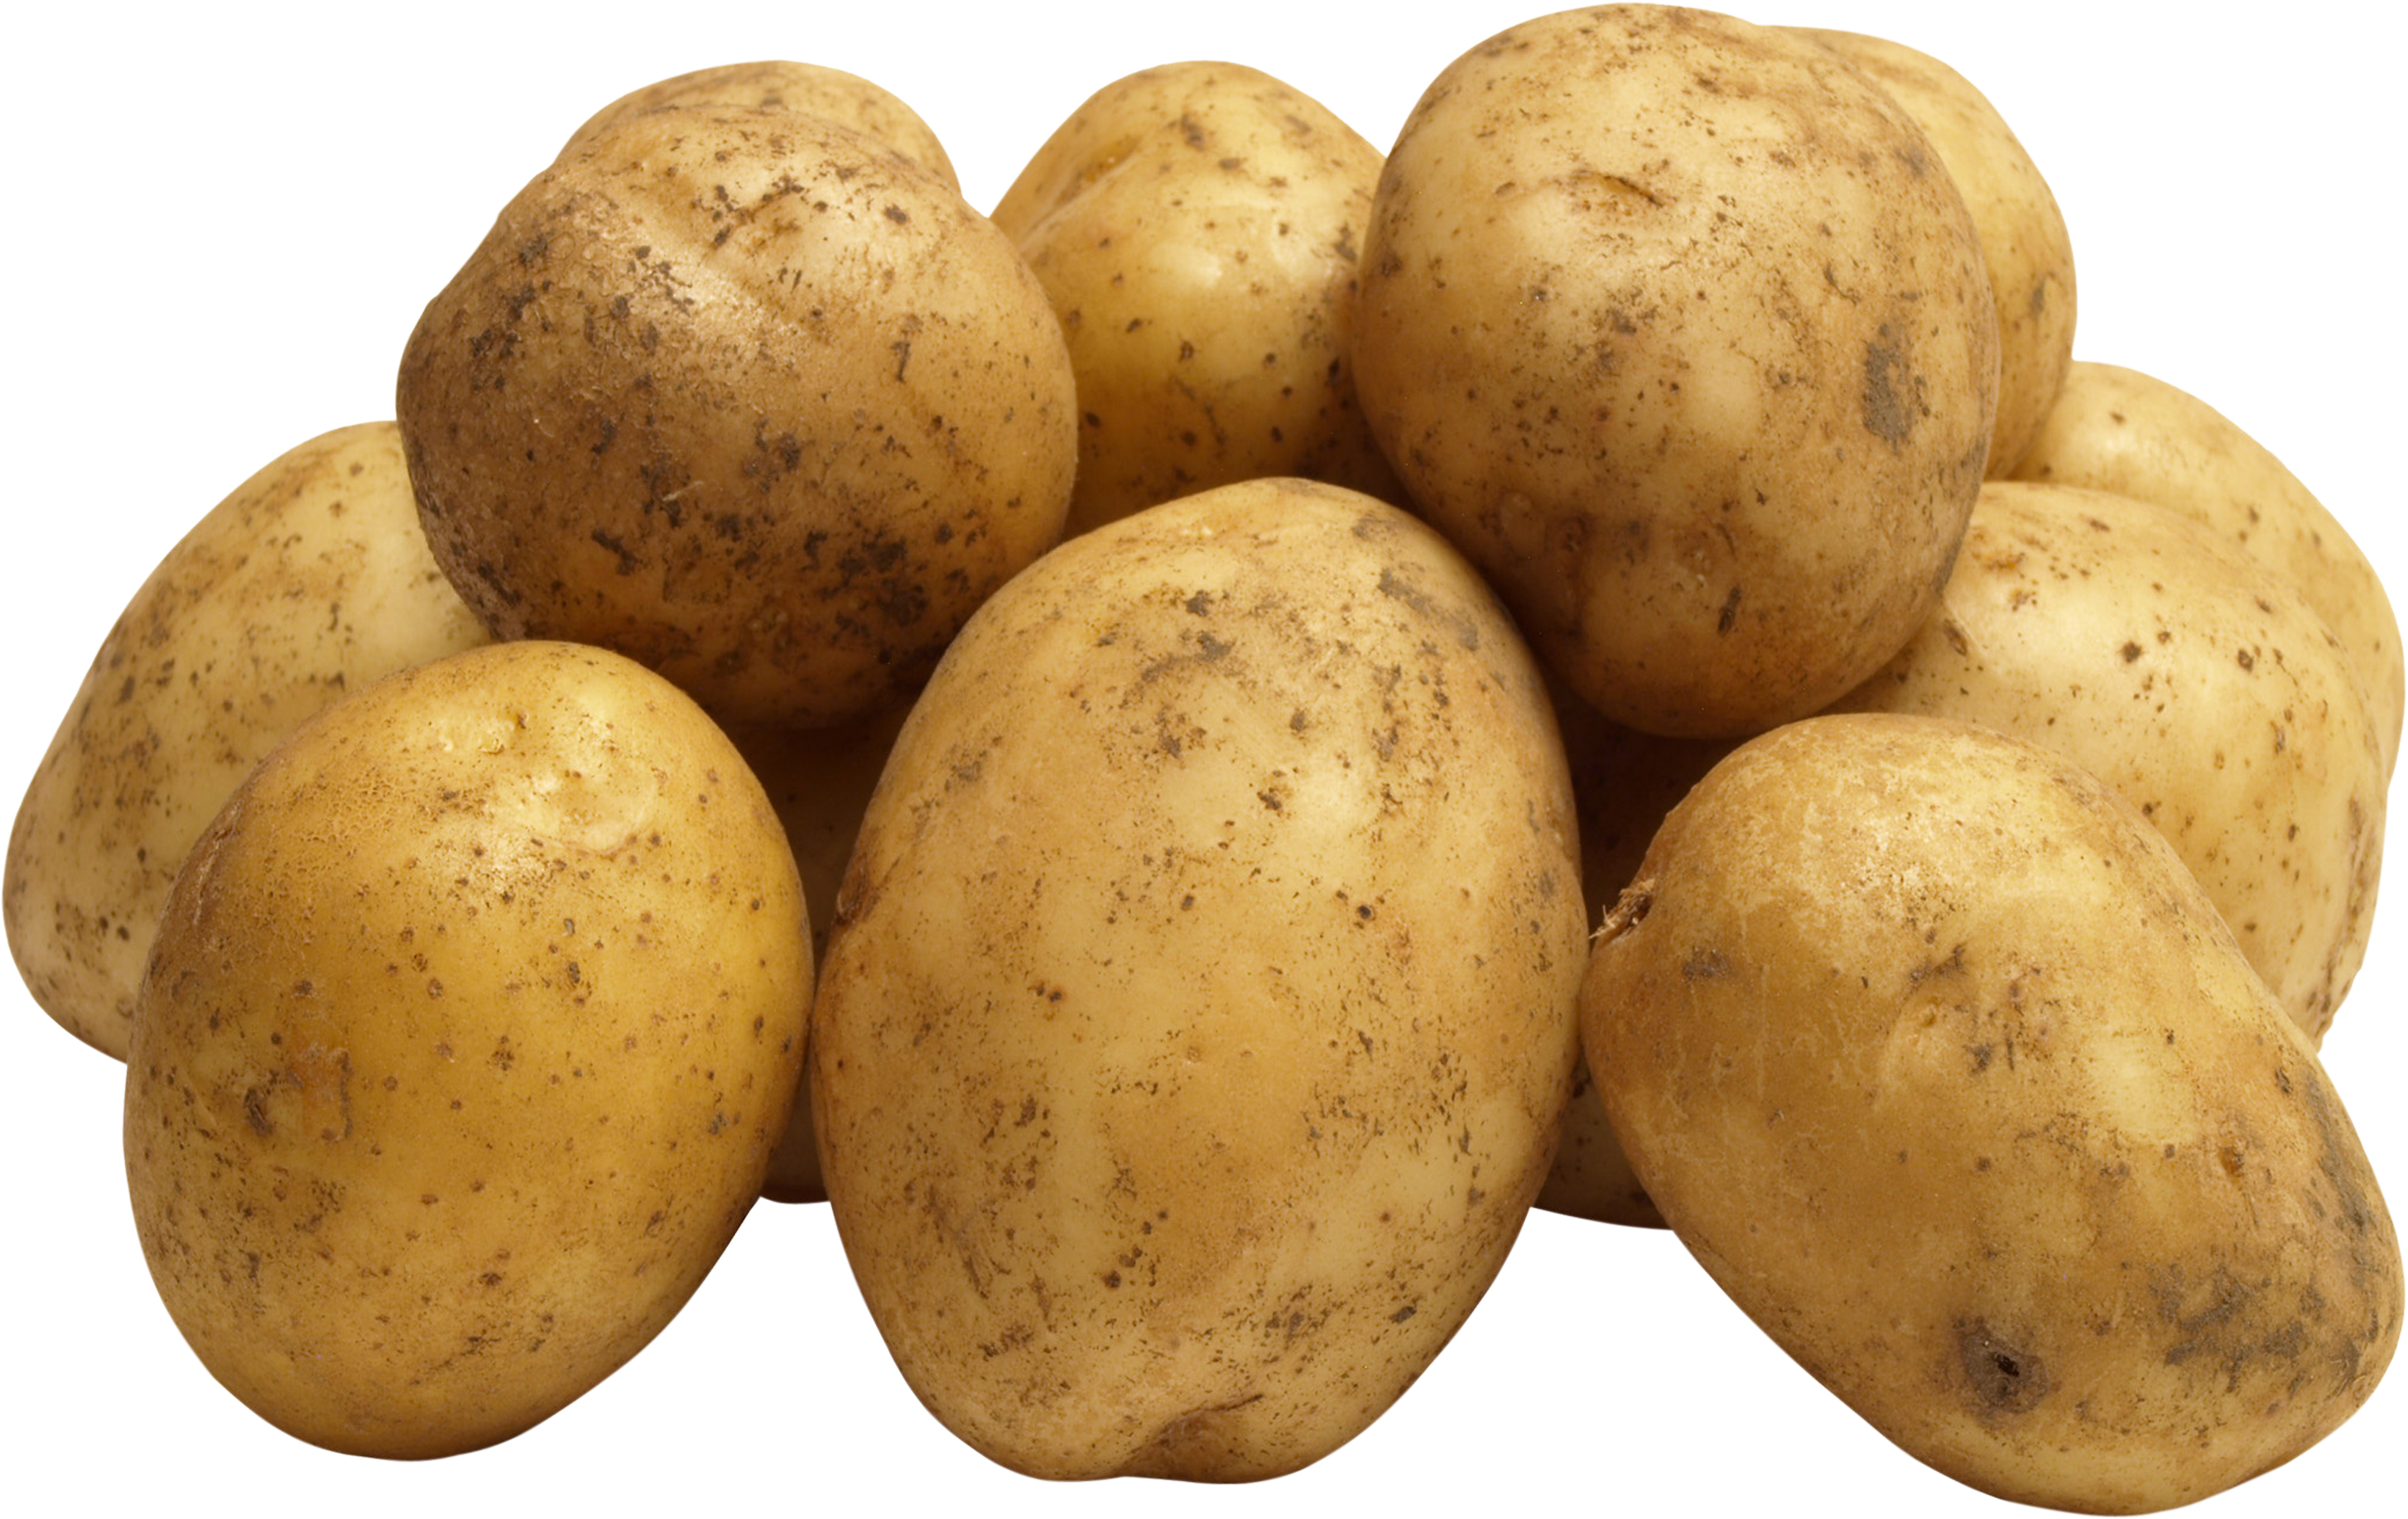 Png image purepng free. Potato clipart high resolution